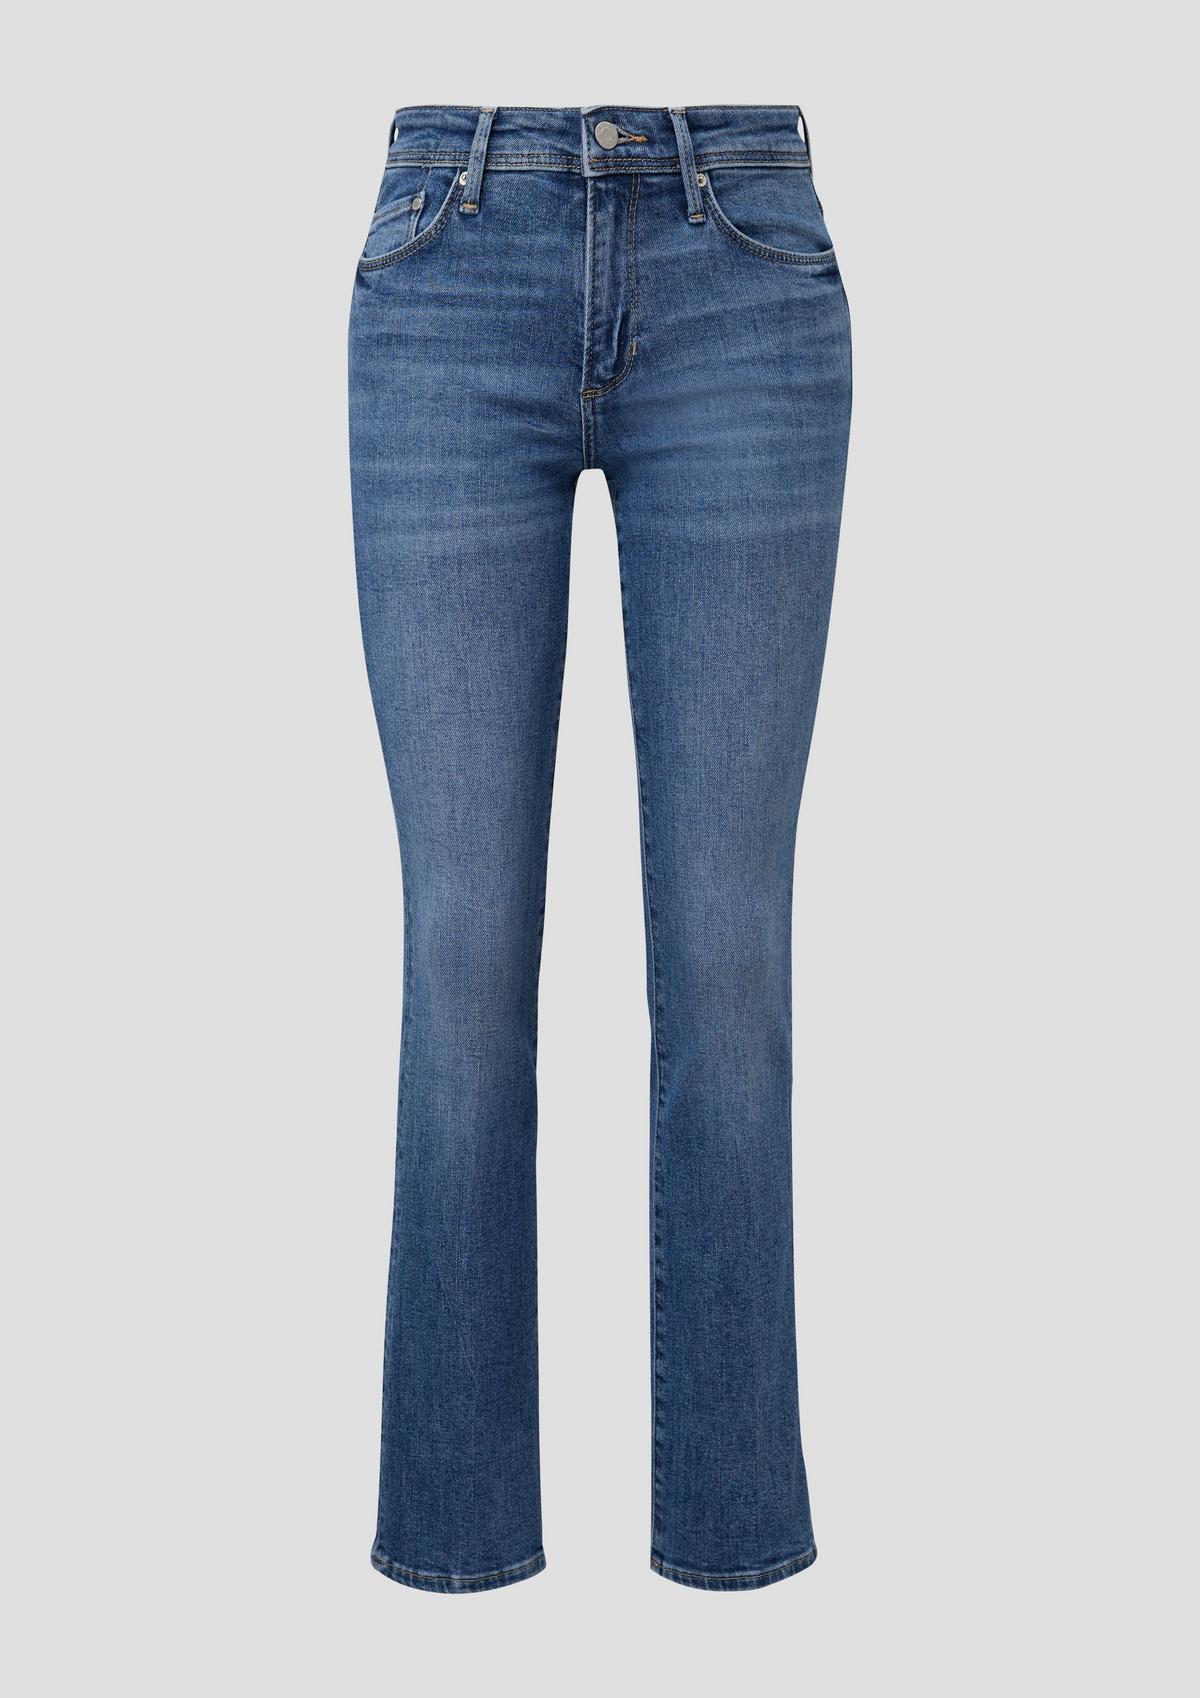 s.Oliver Jeans Beverly / Slim Fit / Mid Rise / Bootcut Leg